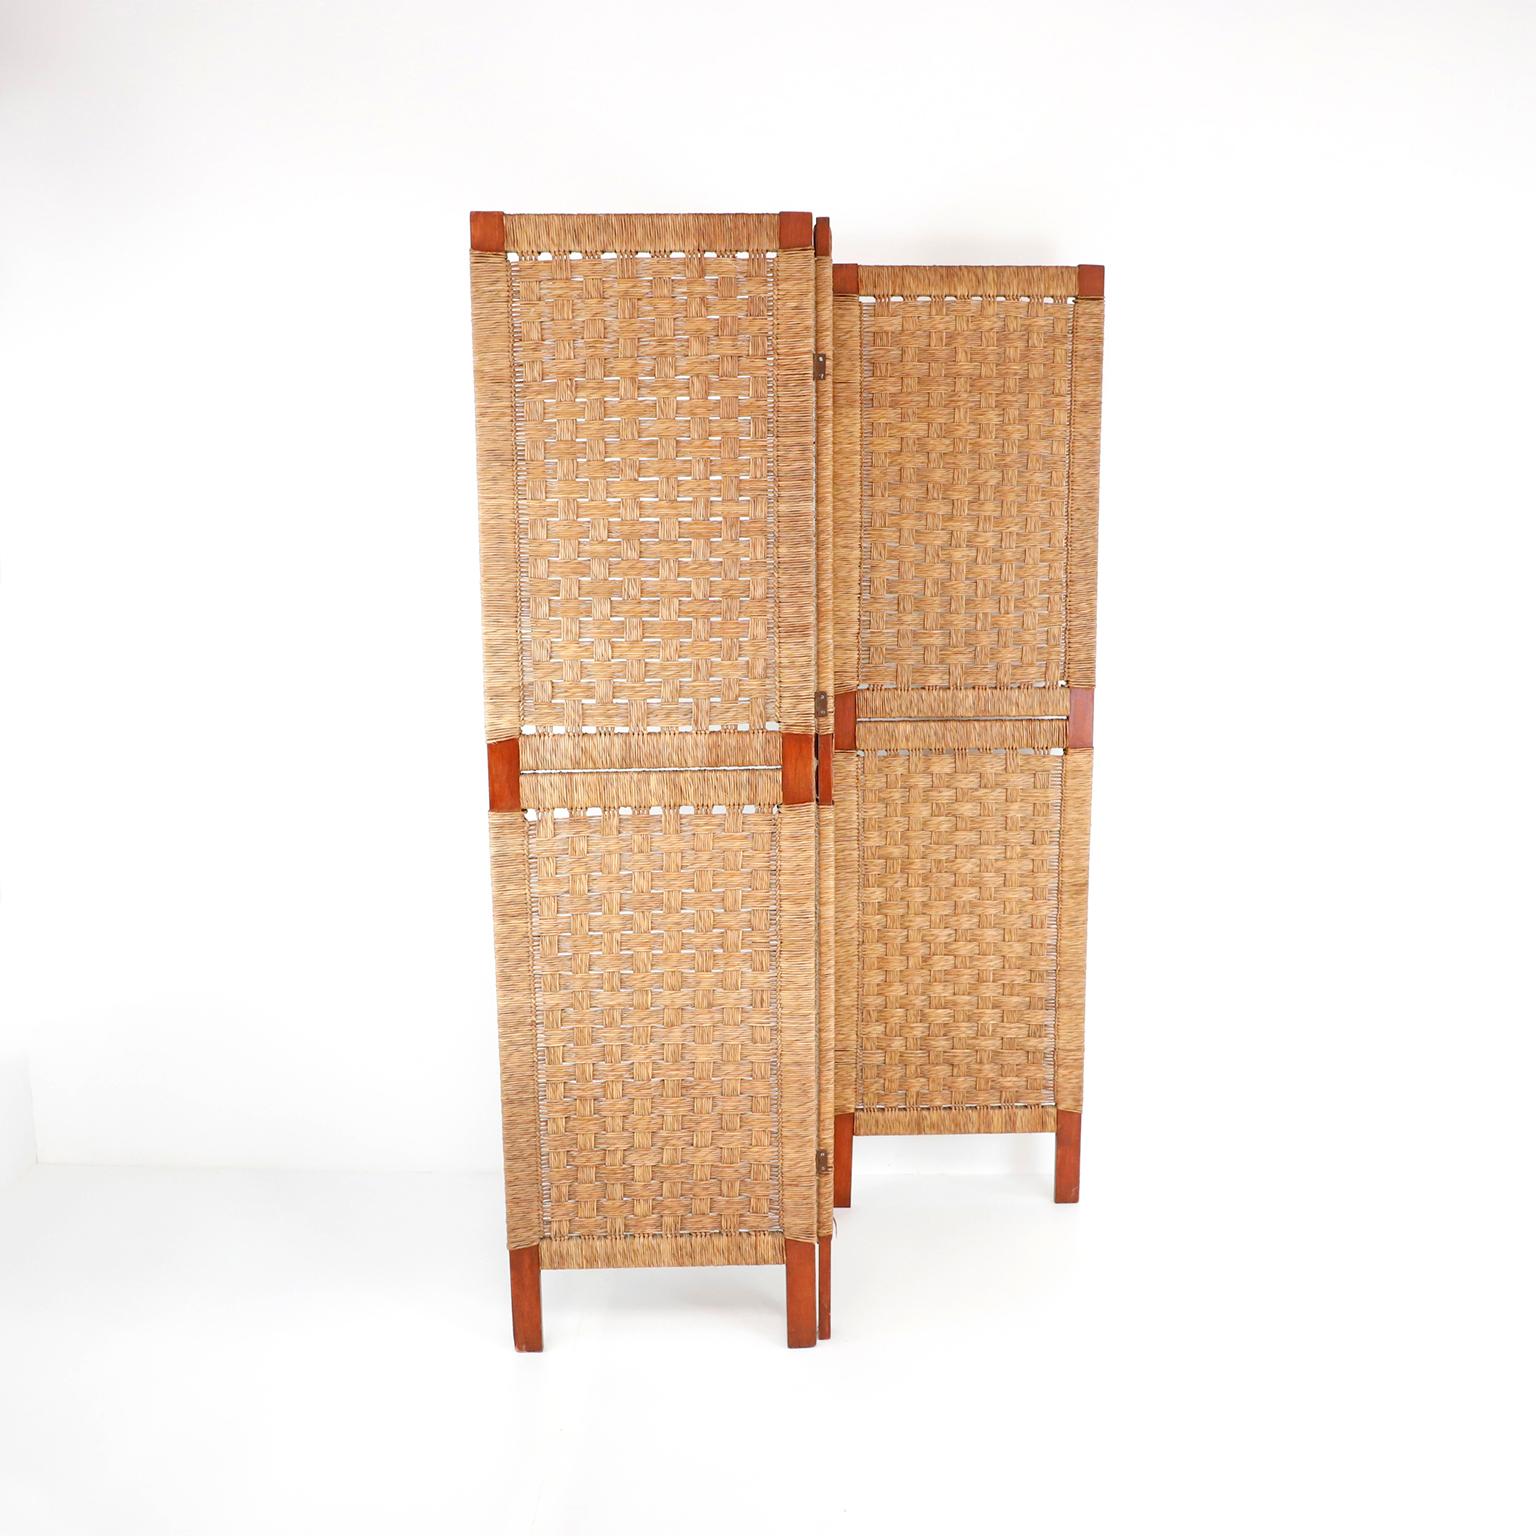 circa 1950, We offer this folding screen room divider in the style of Clar Porset, made in pine wood and palm cords.